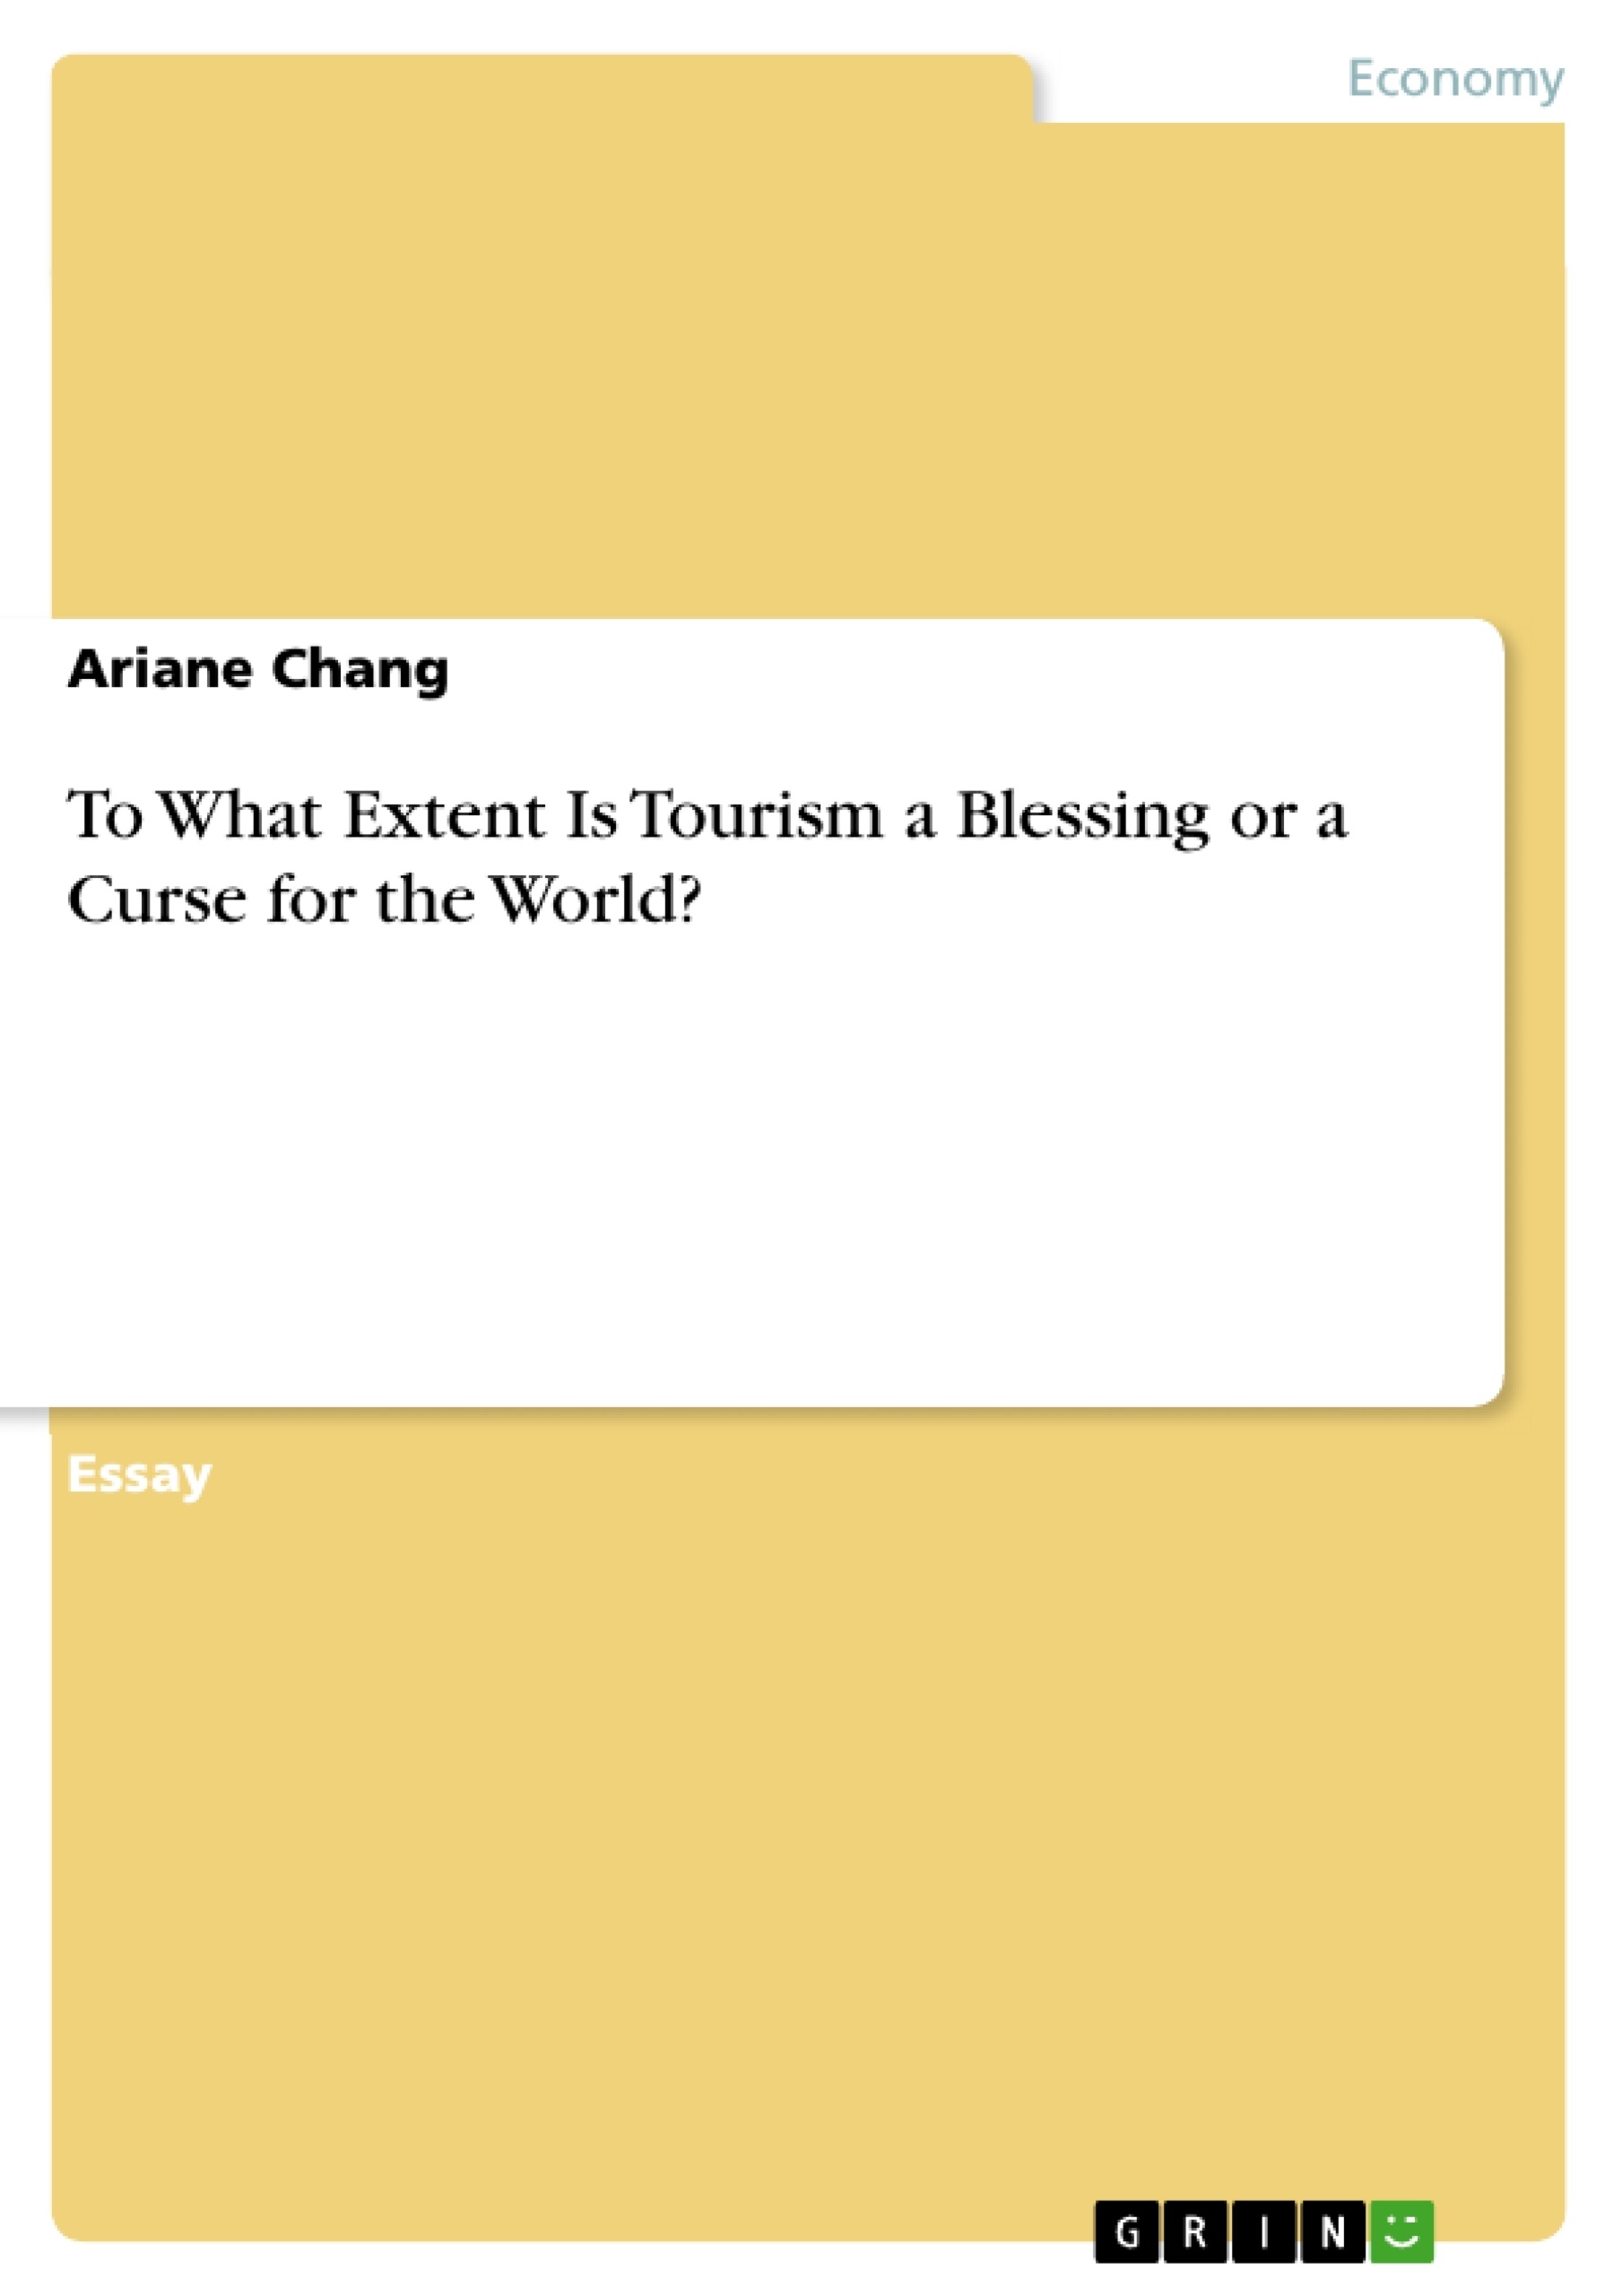 Title: To What Extent Is Tourism a Blessing or a Curse for the World?